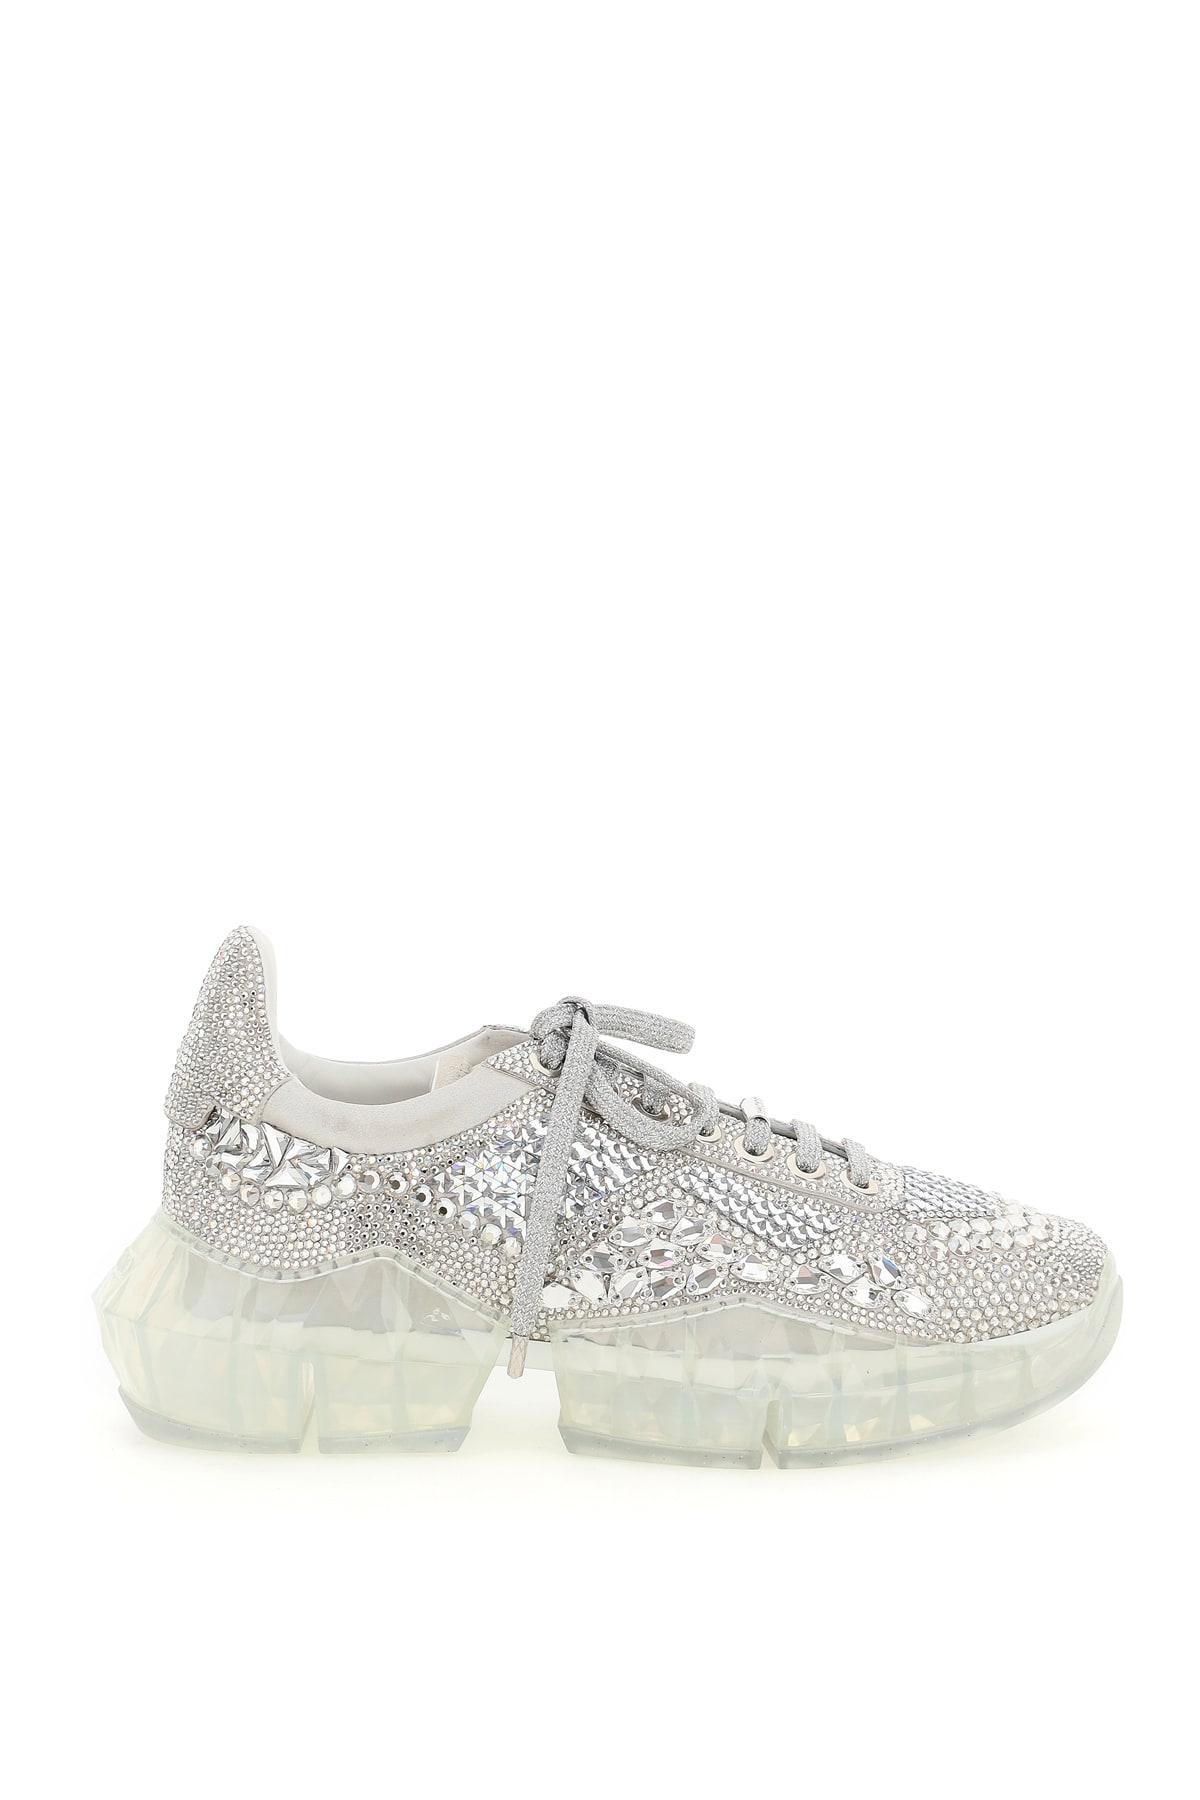 Buy Jimmy Choo Diamond F Sneakers With Crystals online, shop Jimmy Choo shoes with free shipping